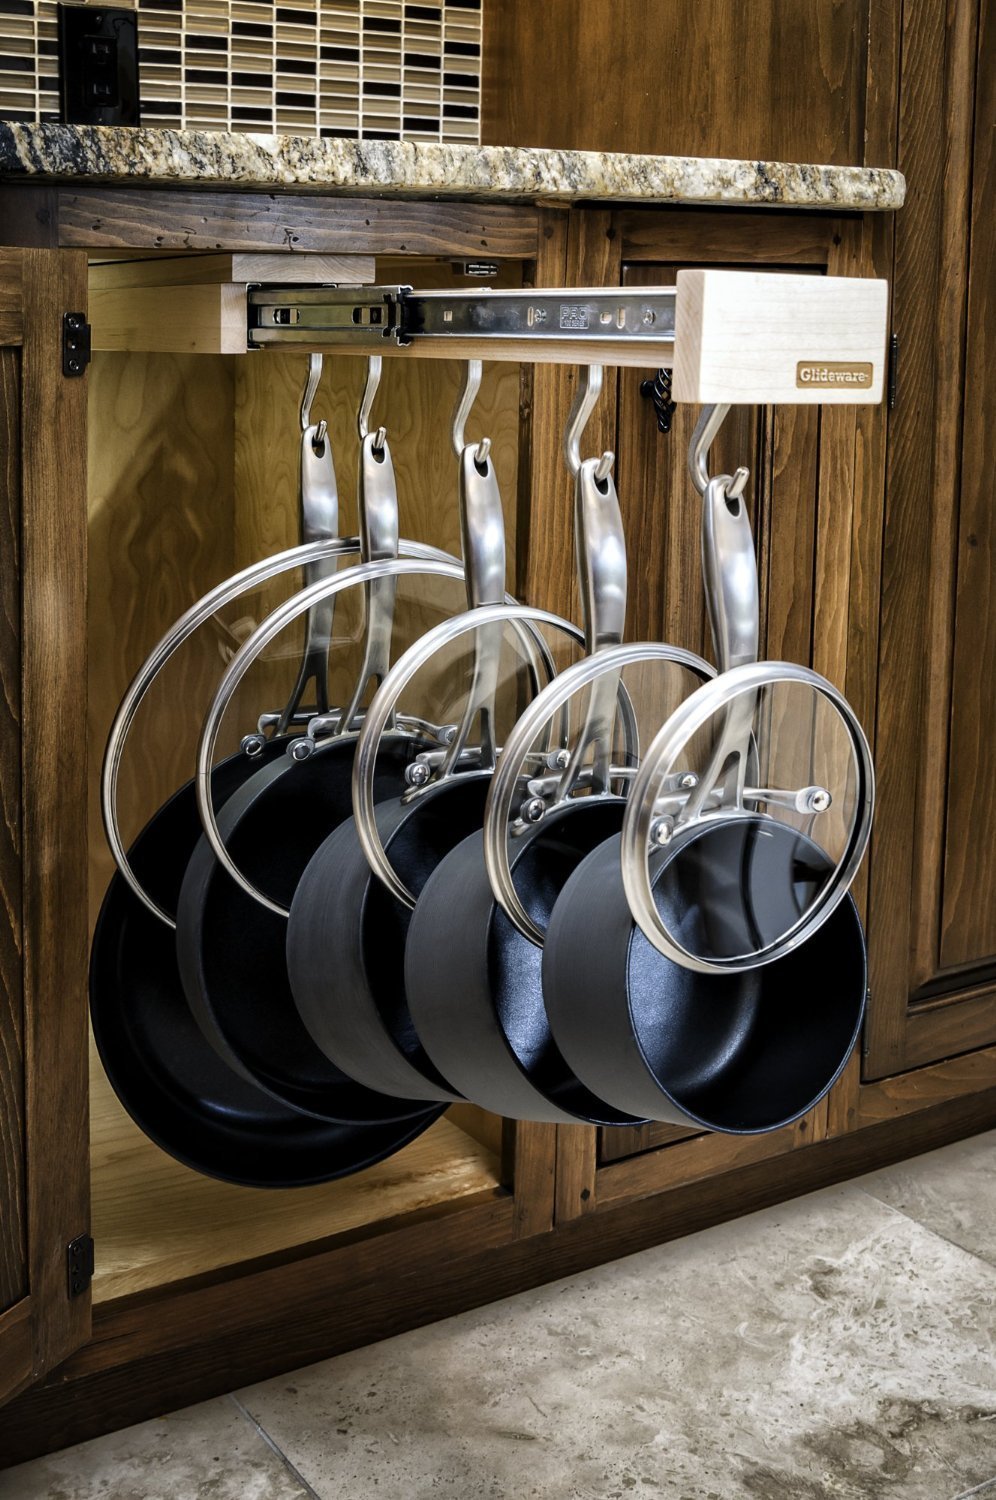 Organizing Pots And Pans Ideas Solutions, Hanging Pot Rack Inside Cabinet